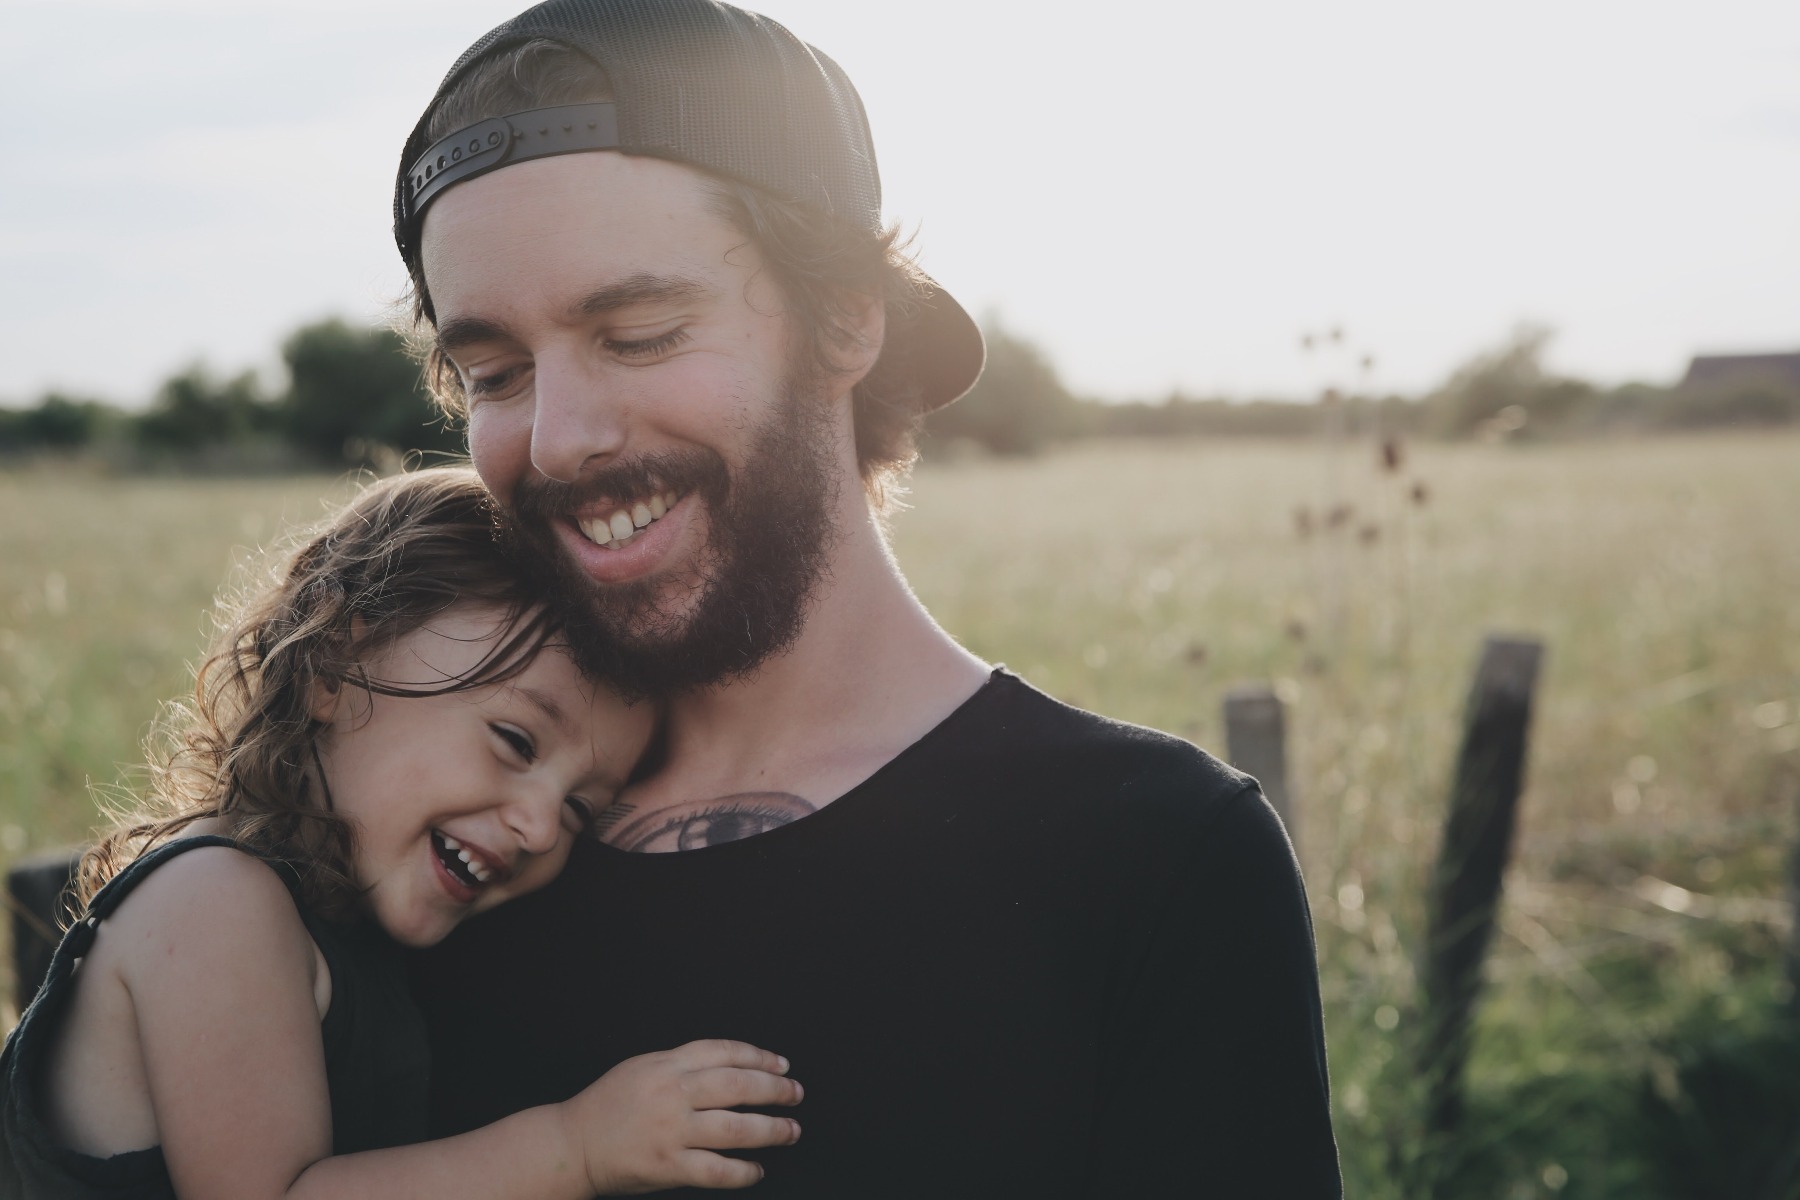 A close-up image of a bearded, dark-haired man wearing a cap backwards and a black t-shirt, cuddling and laughing with his young daughter outdoors in a field on a sunny day.